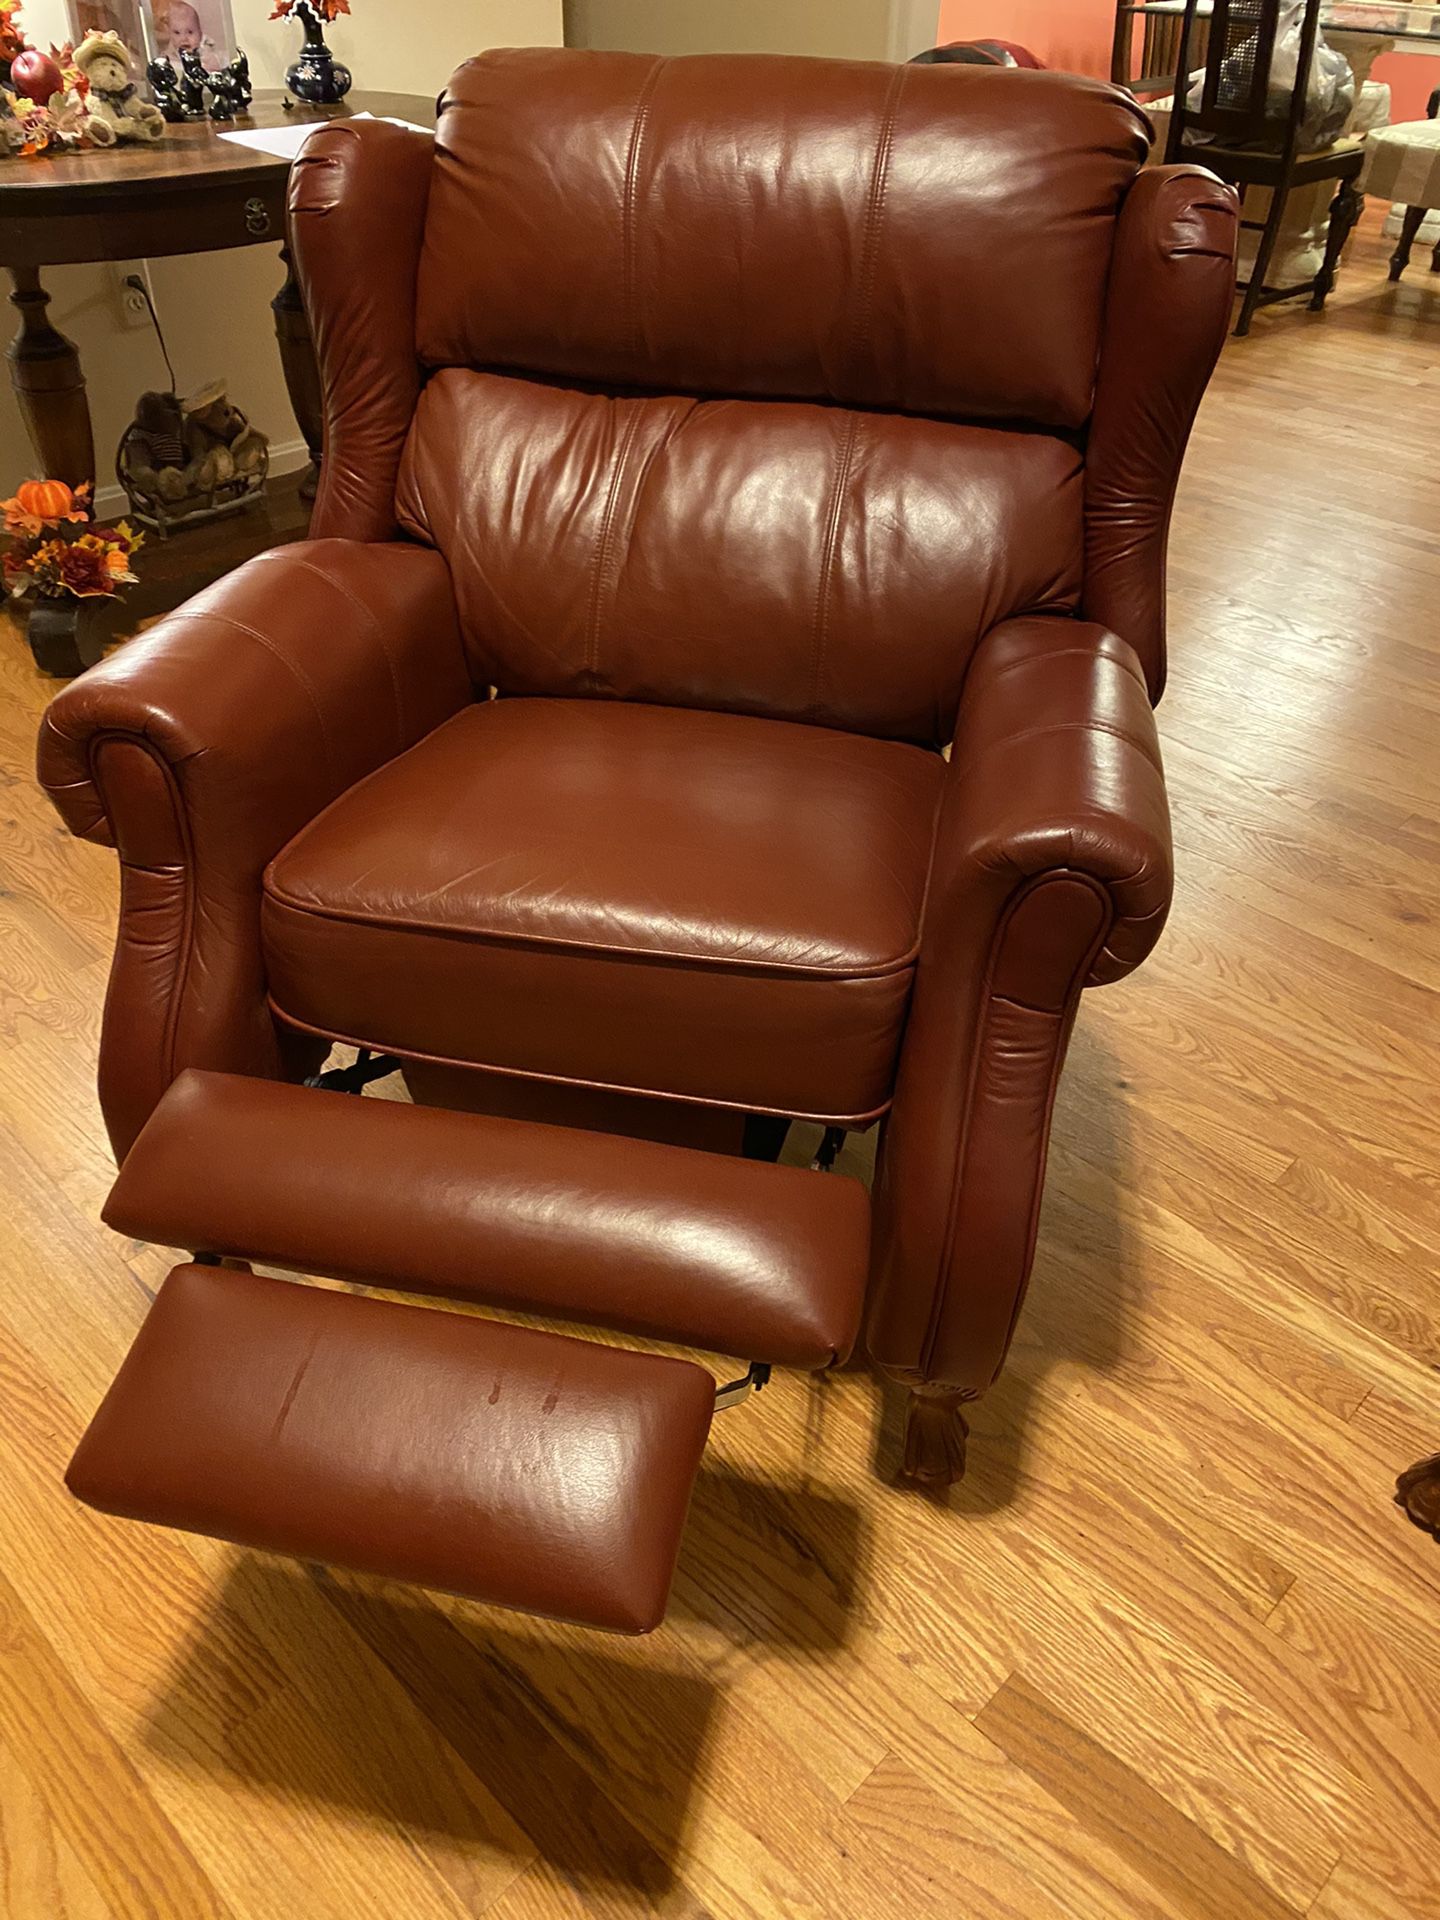 Two Dark red leather recliners